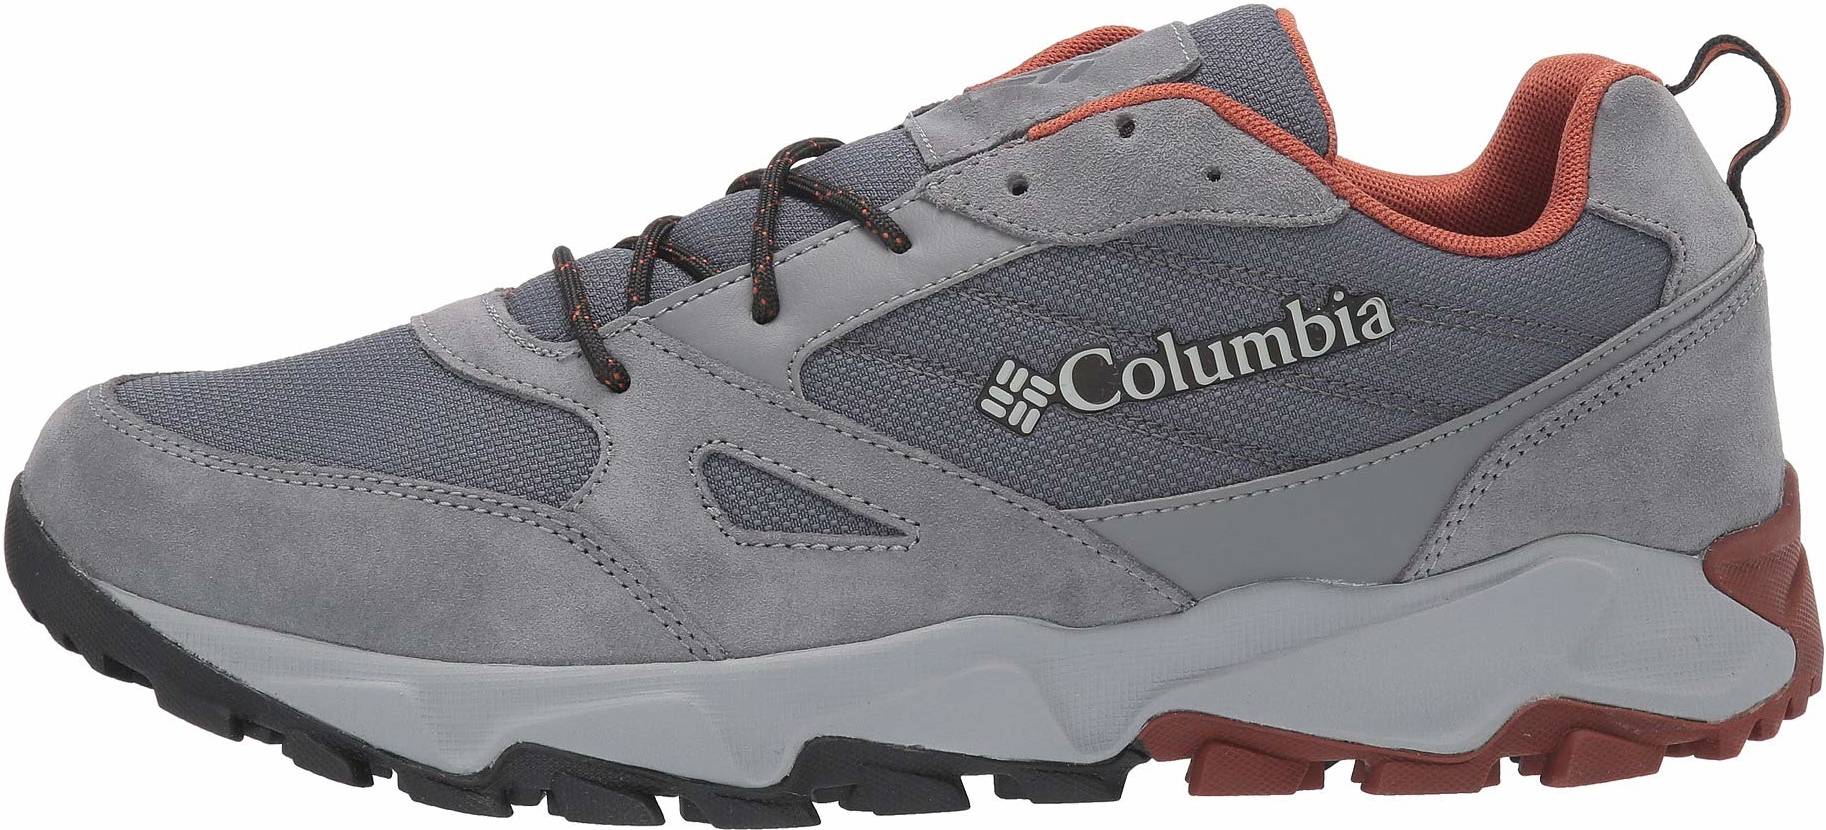 Only $45 + Review of Columbia Ivo Trail 